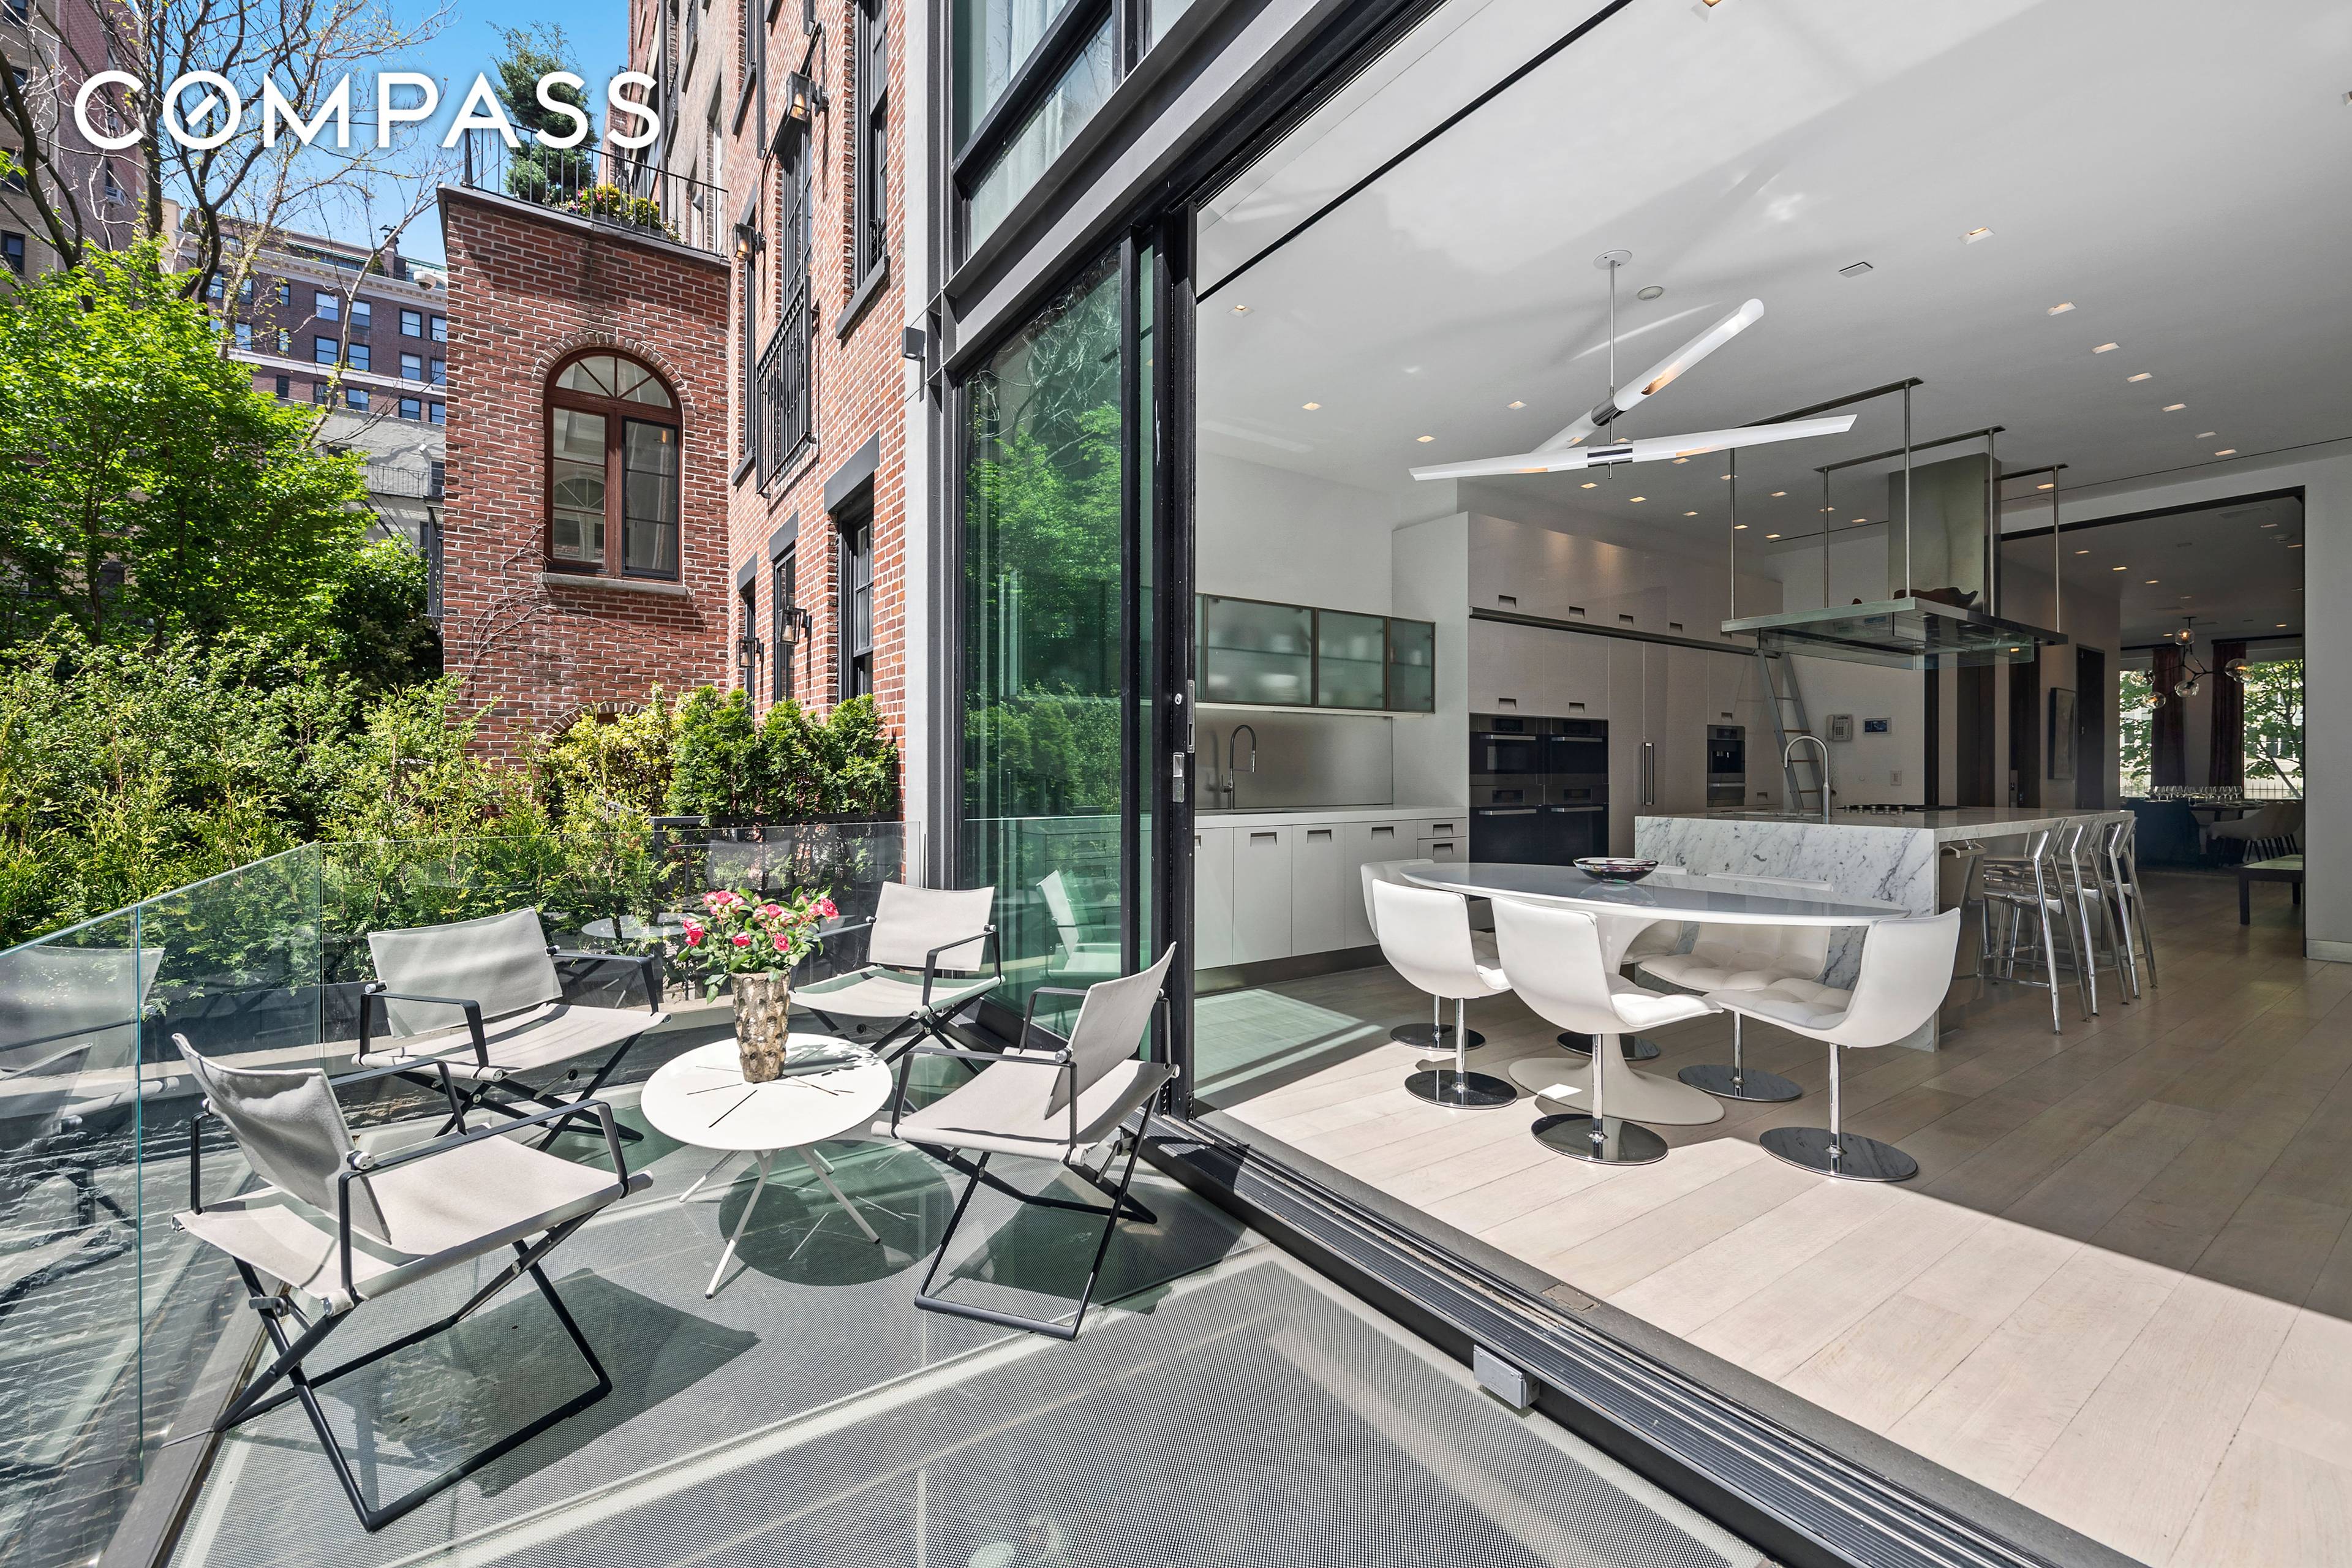 Located on a tree lined block famous for its exquisite townhouses, this contemporary, light filled six story home presents the ultimate in luxury living.